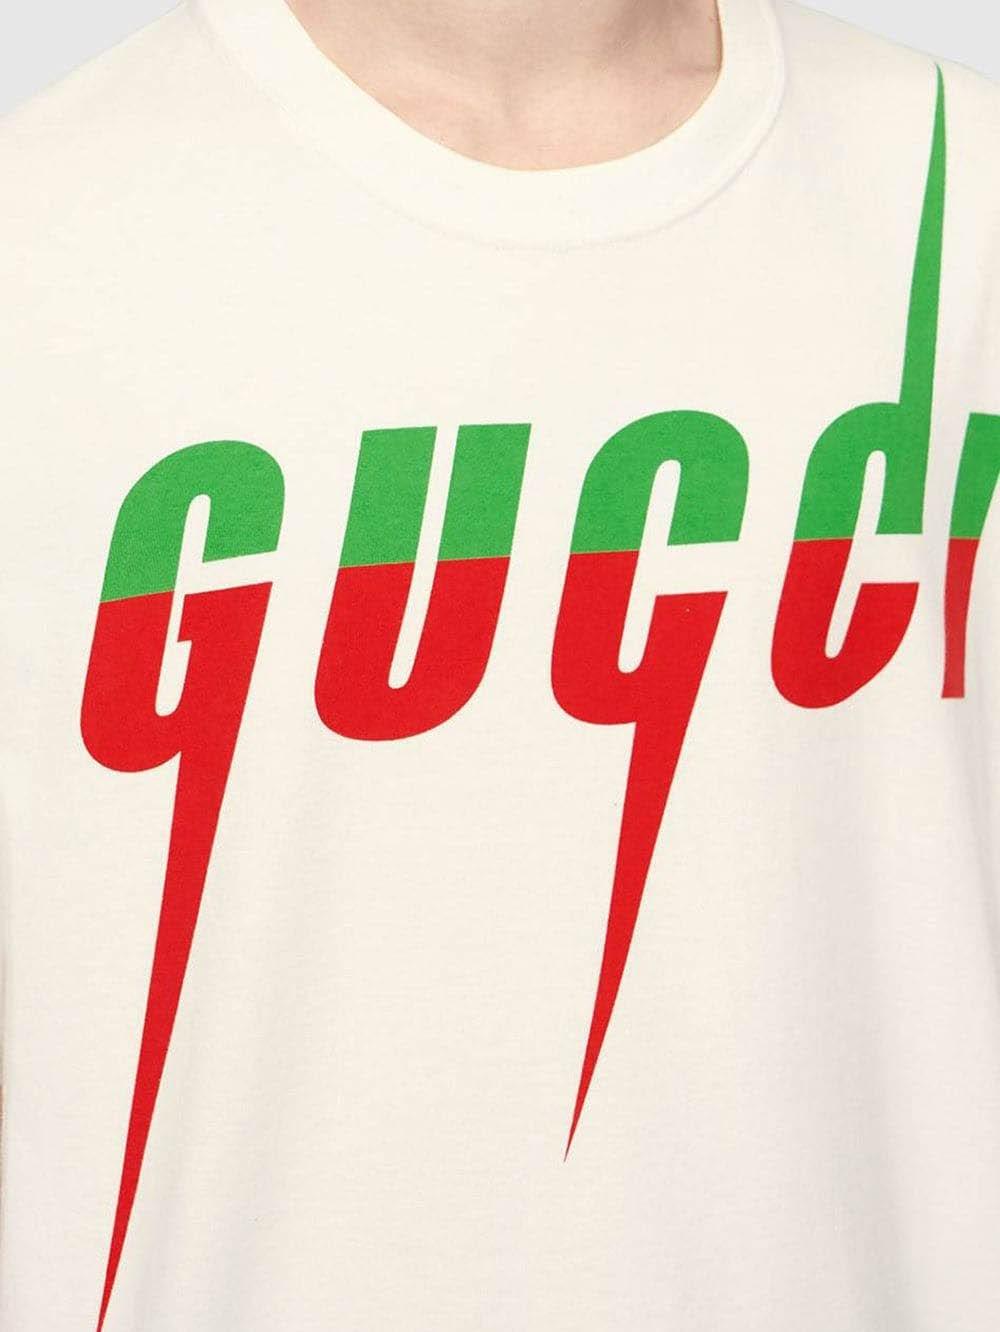 green and red gucci shirt